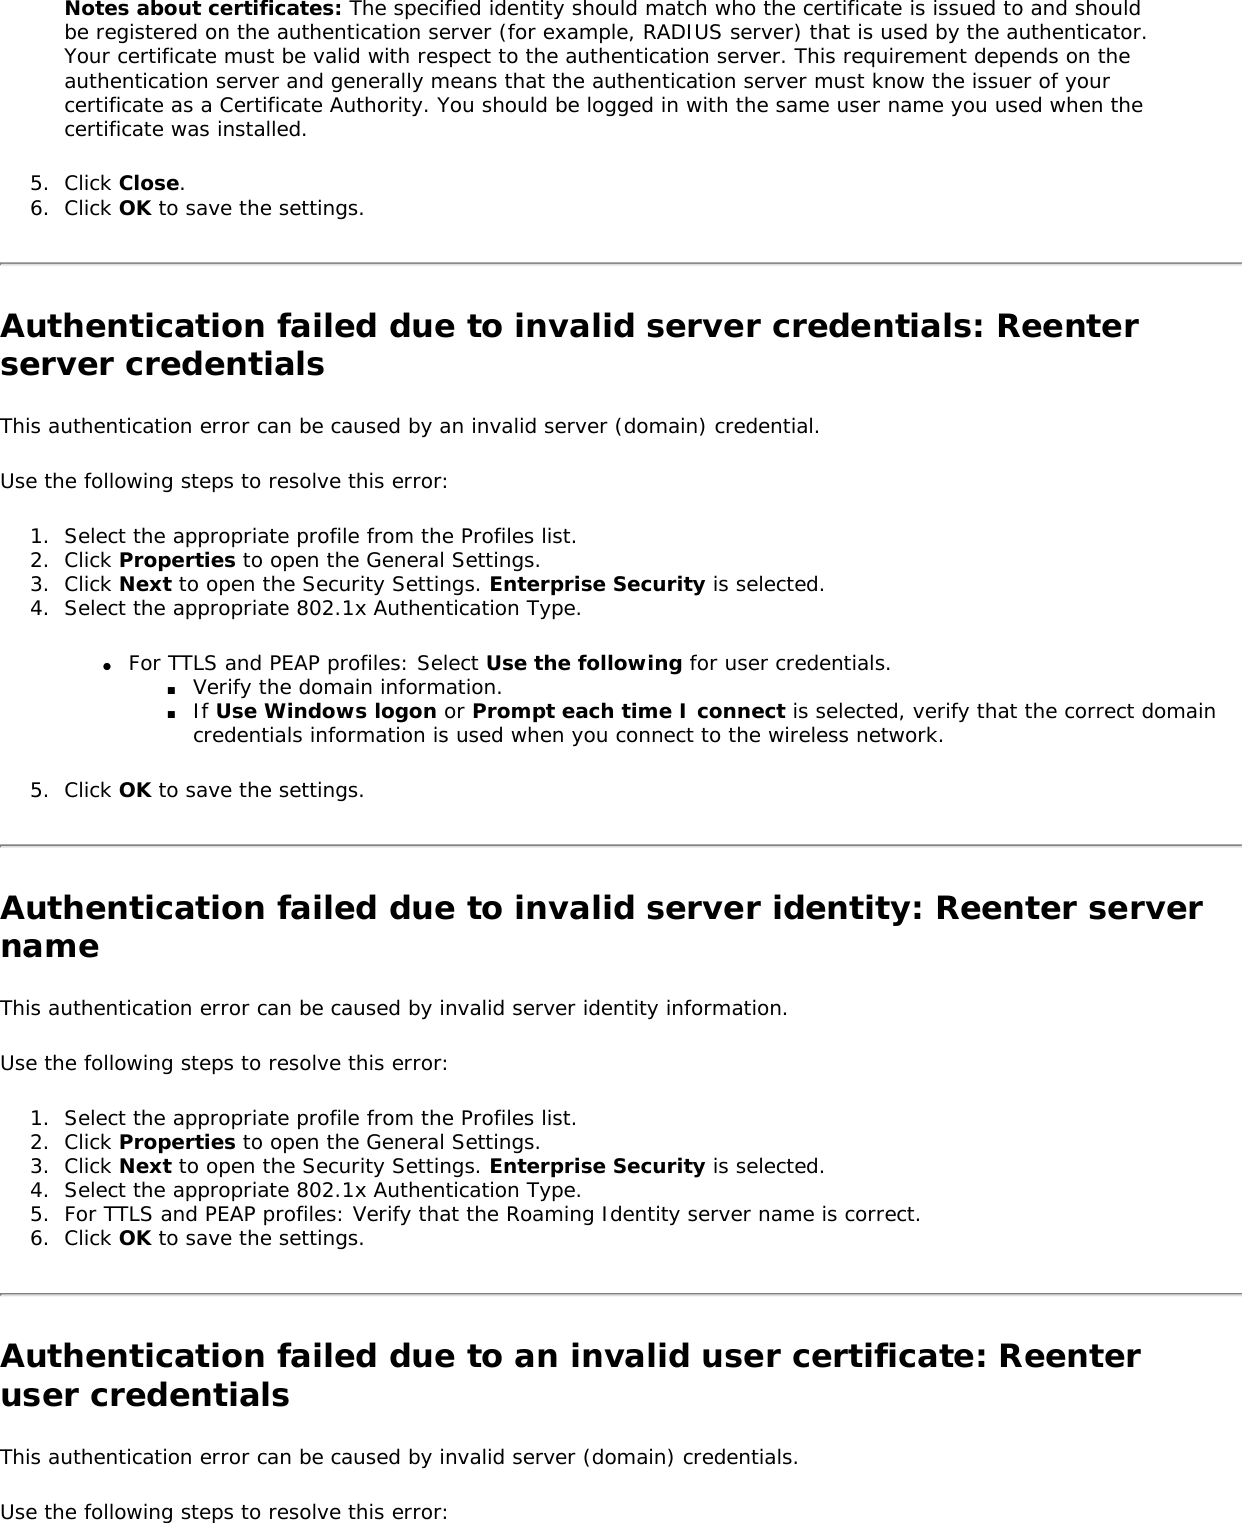 Notes about certificates: The specified identity should match who the certificate is issued to and should be registered on the authentication server (for example, RADIUS server) that is used by the authenticator. Your certificate must be valid with respect to the authentication server. This requirement depends on the authentication server and generally means that the authentication server must know the issuer of your certificate as a Certificate Authority. You should be logged in with the same user name you used when the certificate was installed. 5.  Click Close. 6.  Click OK to save the settings. Authentication failed due to invalid server credentials: Reenter server credentials This authentication error can be caused by an invalid server (domain) credential. Use the following steps to resolve this error: 1.  Select the appropriate profile from the Profiles list.2.  Click Properties to open the General Settings.3.  Click Next to open the Security Settings. Enterprise Security is selected. 4.  Select the appropriate 802.1x Authentication Type. ●     For TTLS and PEAP profiles: Select Use the following for user credentials. ■     Verify the domain information. ■     If Use Windows logon or Prompt each time I connect is selected, verify that the correct domain credentials information is used when you connect to the wireless network. 5.  Click OK to save the settings. Authentication failed due to invalid server identity: Reenter server name This authentication error can be caused by invalid server identity information. Use the following steps to resolve this error: 1.  Select the appropriate profile from the Profiles list. 2.  Click Properties to open the General Settings.3.  Click Next to open the Security Settings. Enterprise Security is selected. 4.  Select the appropriate 802.1x Authentication Type. 5.  For TTLS and PEAP profiles: Verify that the Roaming Identity server name is correct. 6.  Click OK to save the settings. Authentication failed due to an invalid user certificate: Reenter user credentials This authentication error can be caused by invalid server (domain) credentials. Use the following steps to resolve this error: 